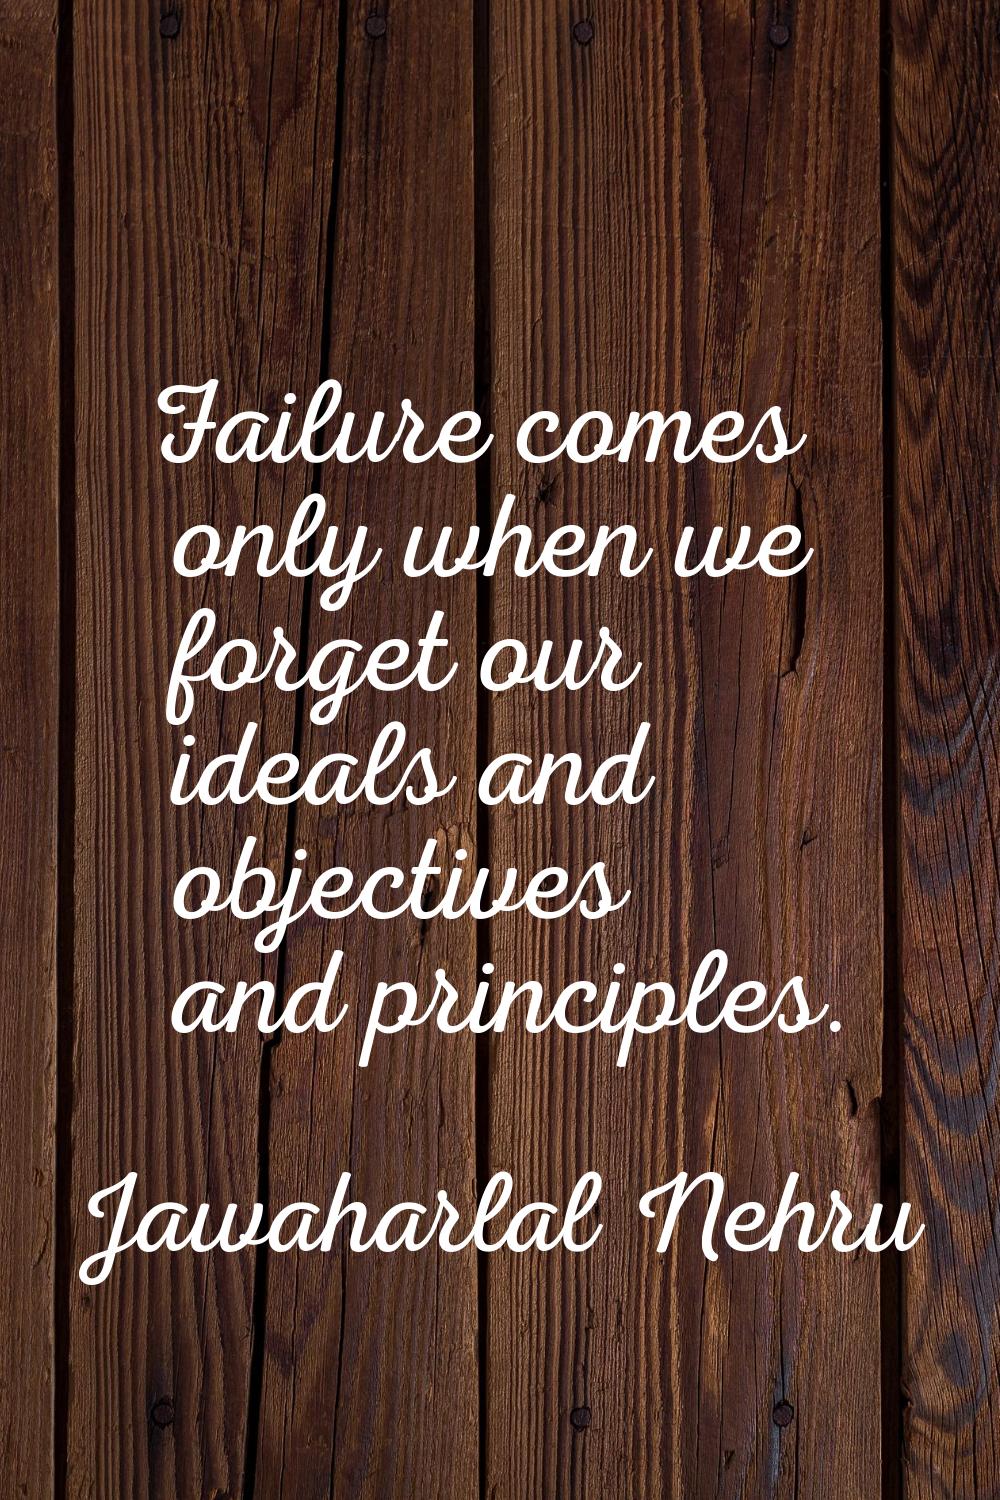 Failure comes only when we forget our ideals and objectives and principles.